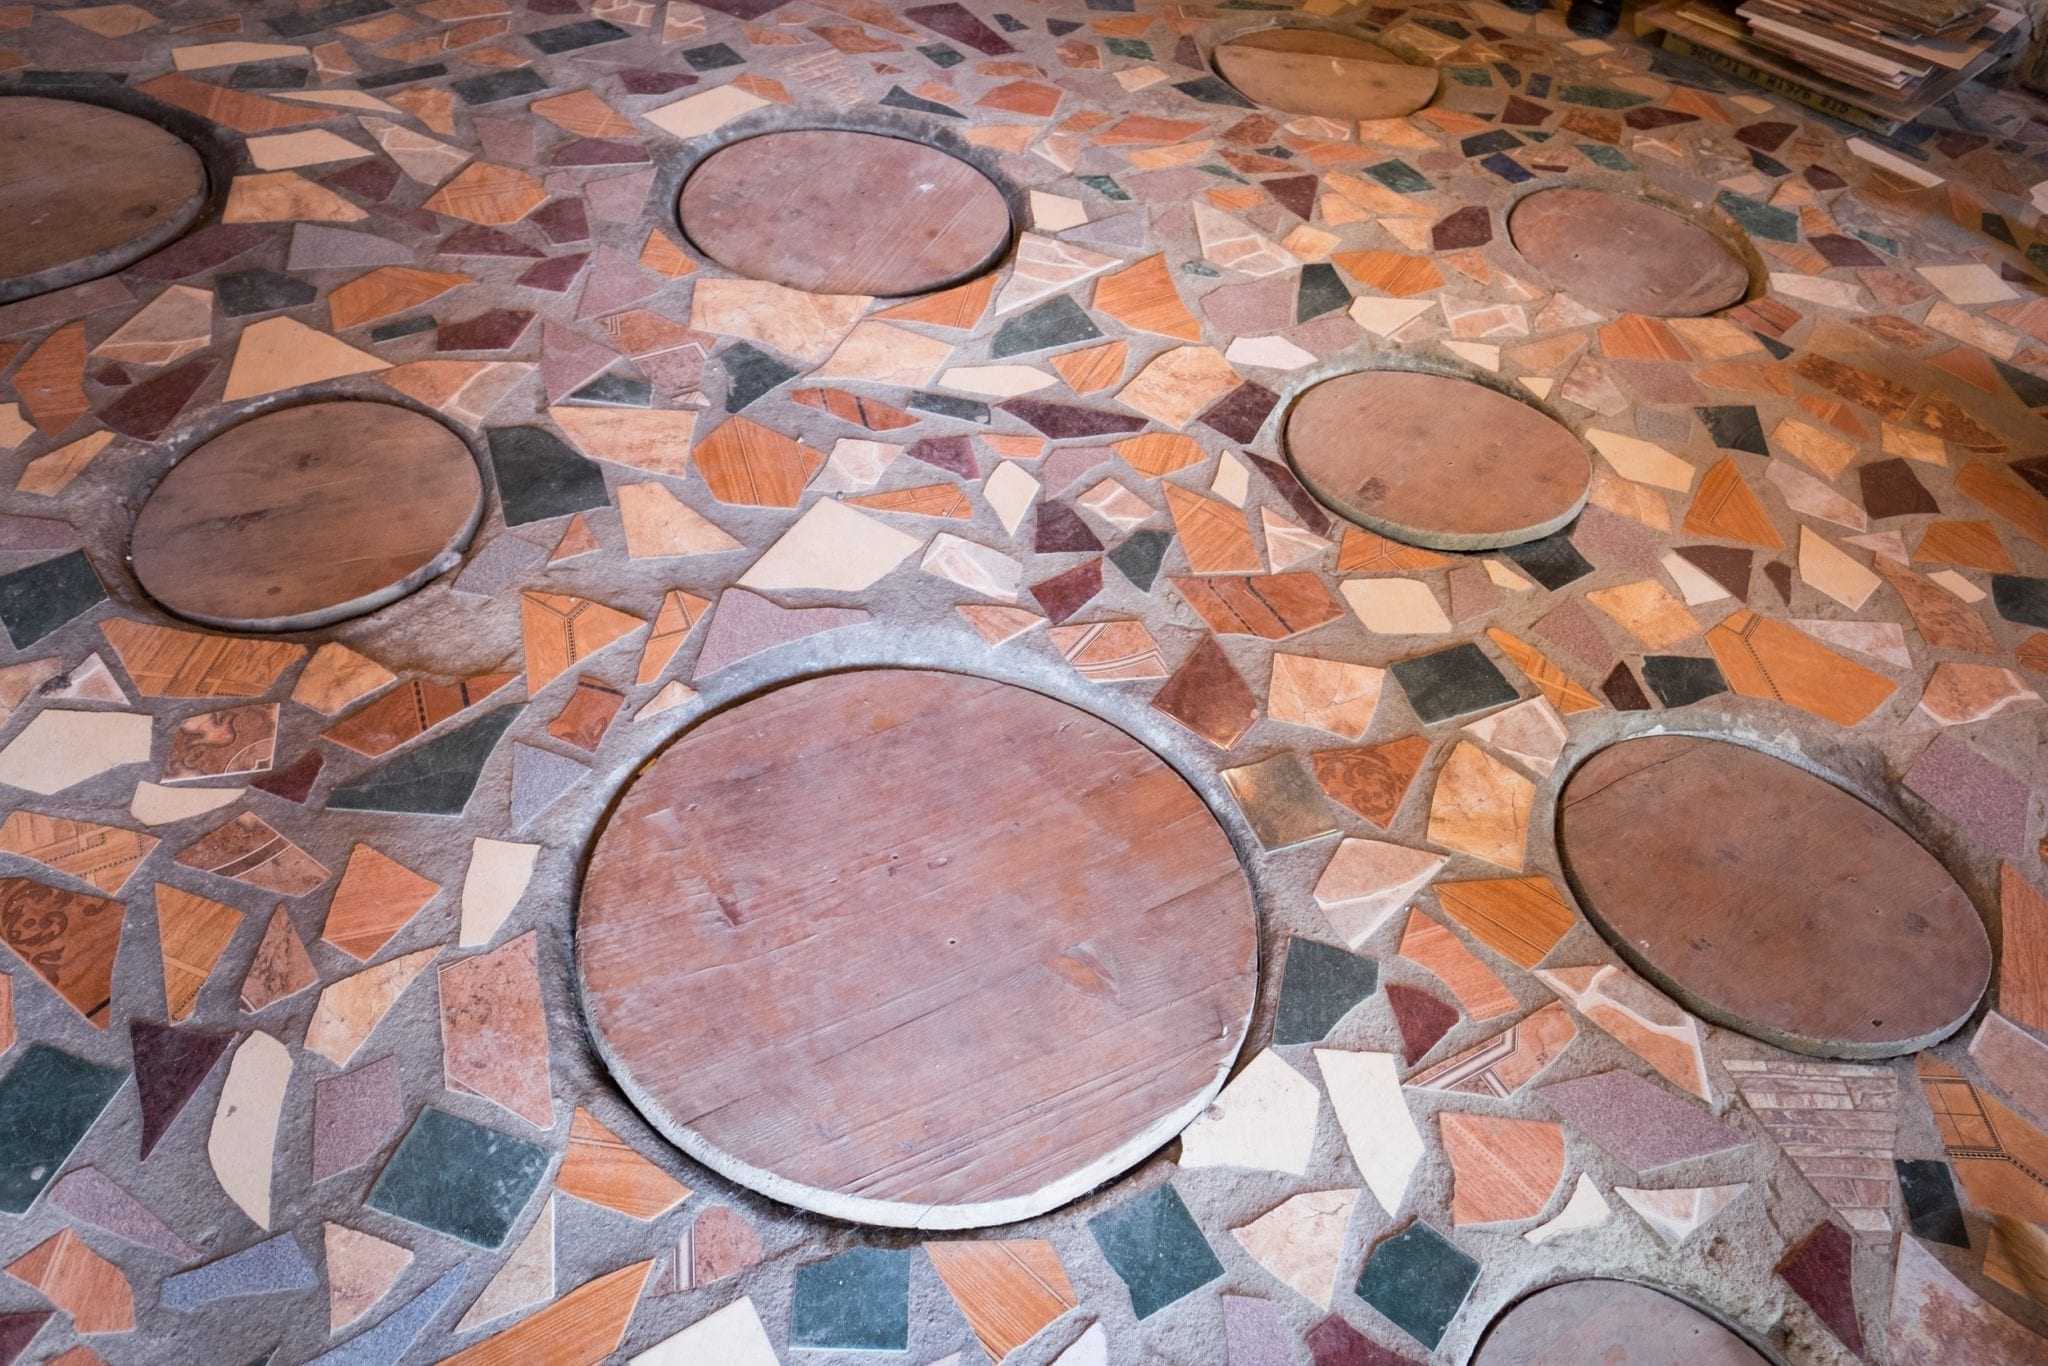 Round holes in a tiled floor where the Georgian qvevri wine is fermented.